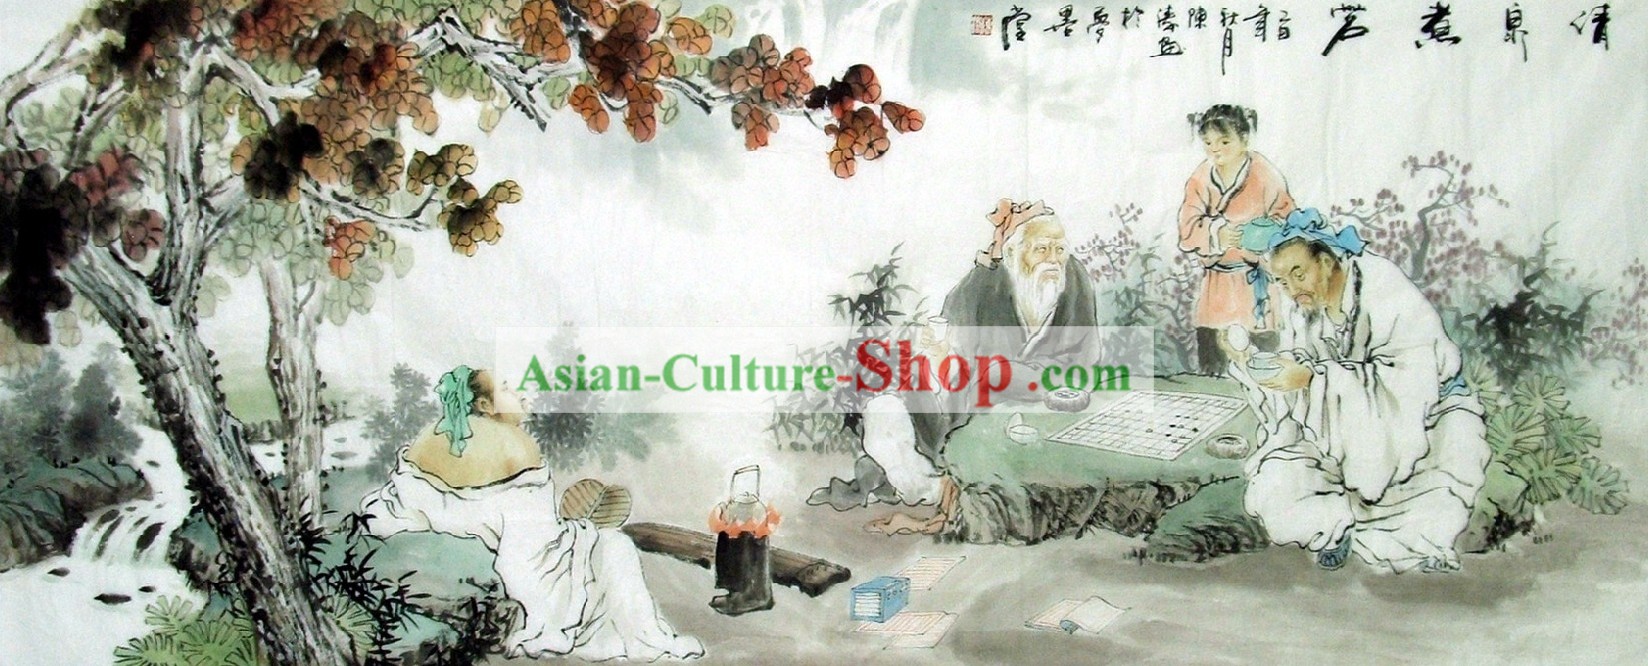 Traditional Chinese Figurine Painting by Chen Tao